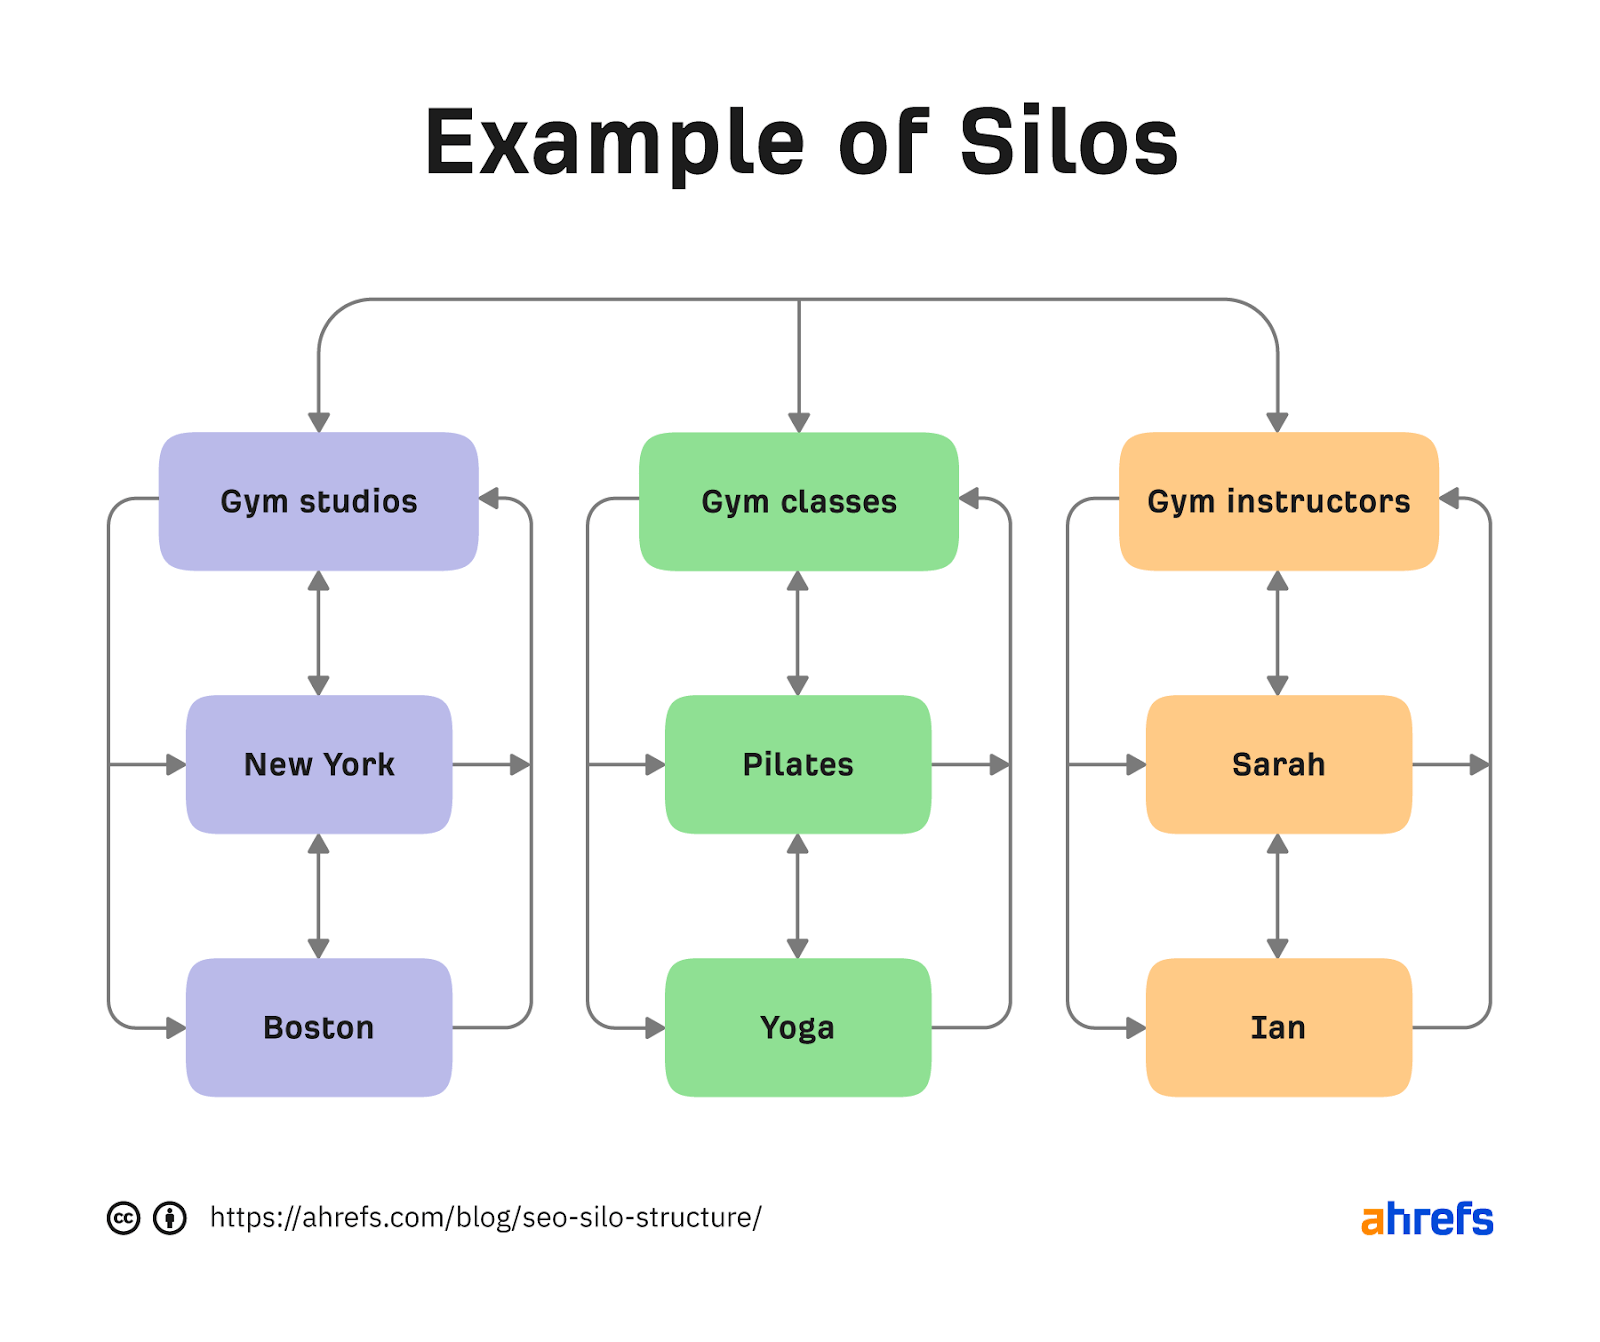 Flowchart of three silos: gym studios, gym classes, gym instructors; notably, instructor "Sarah" is under the silo "gym instructors"